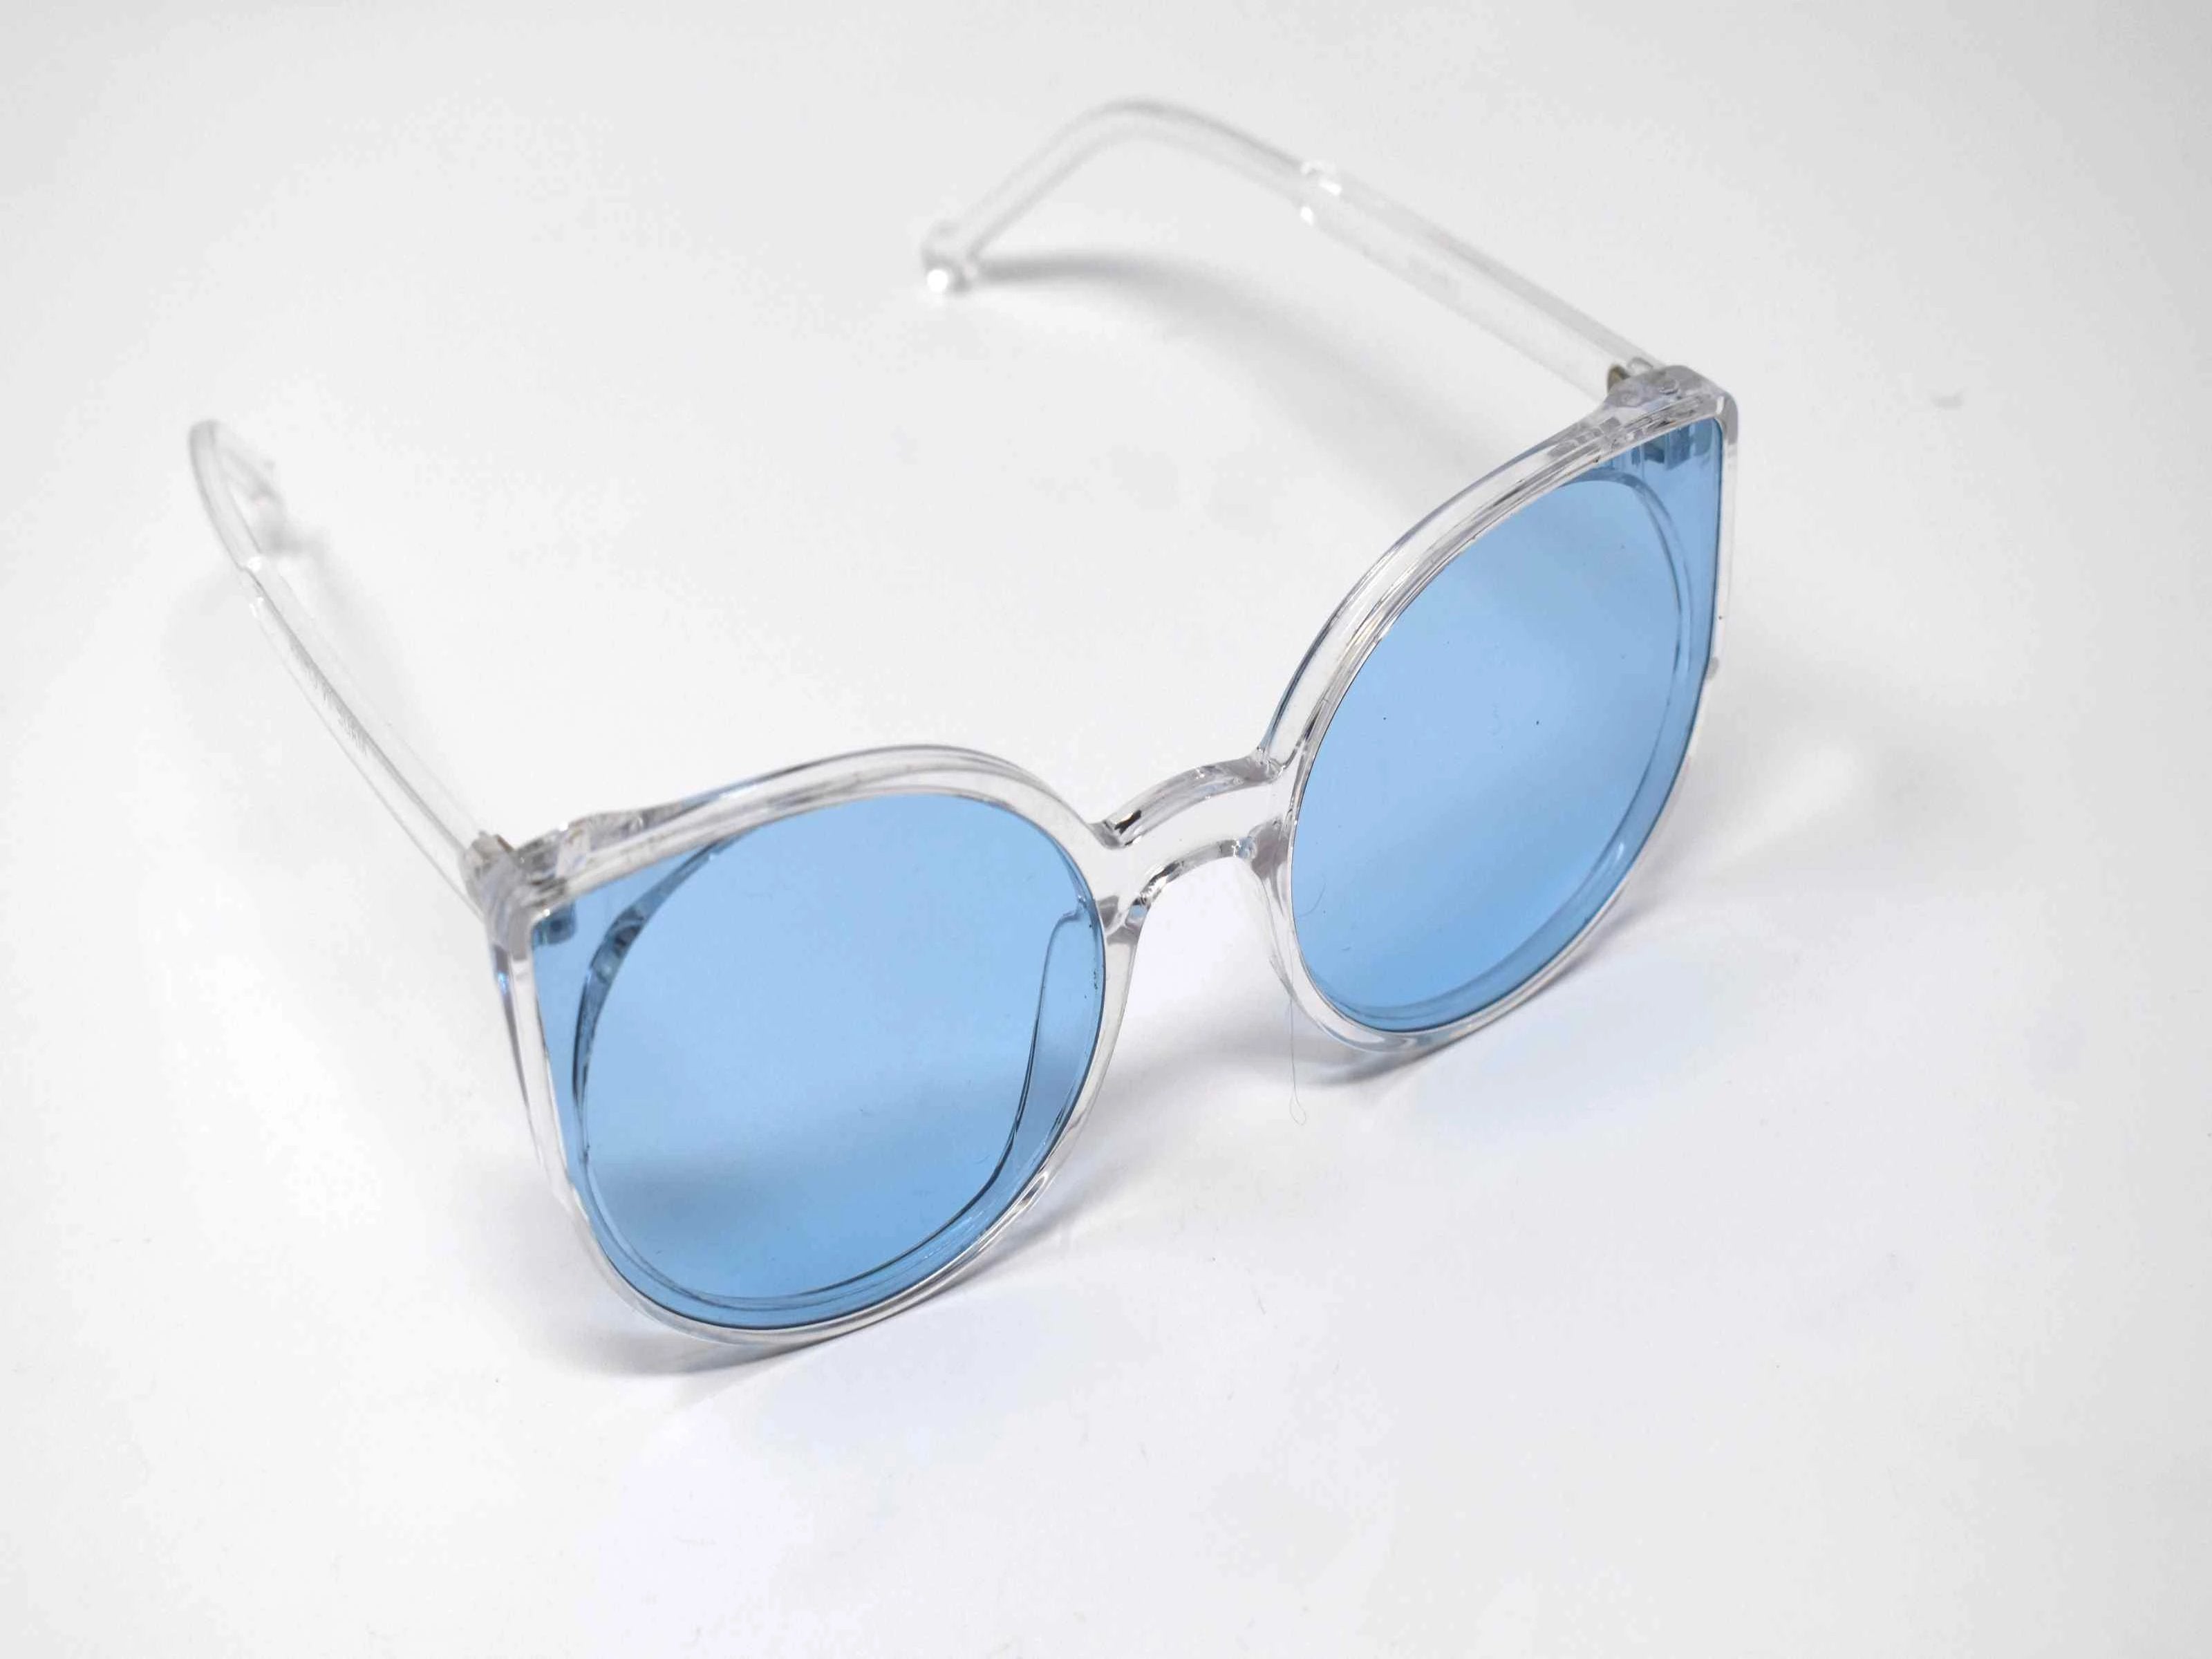 Say hello to our stylish Tansy clear framed sunglasses with blue lens and a cat eye shape.